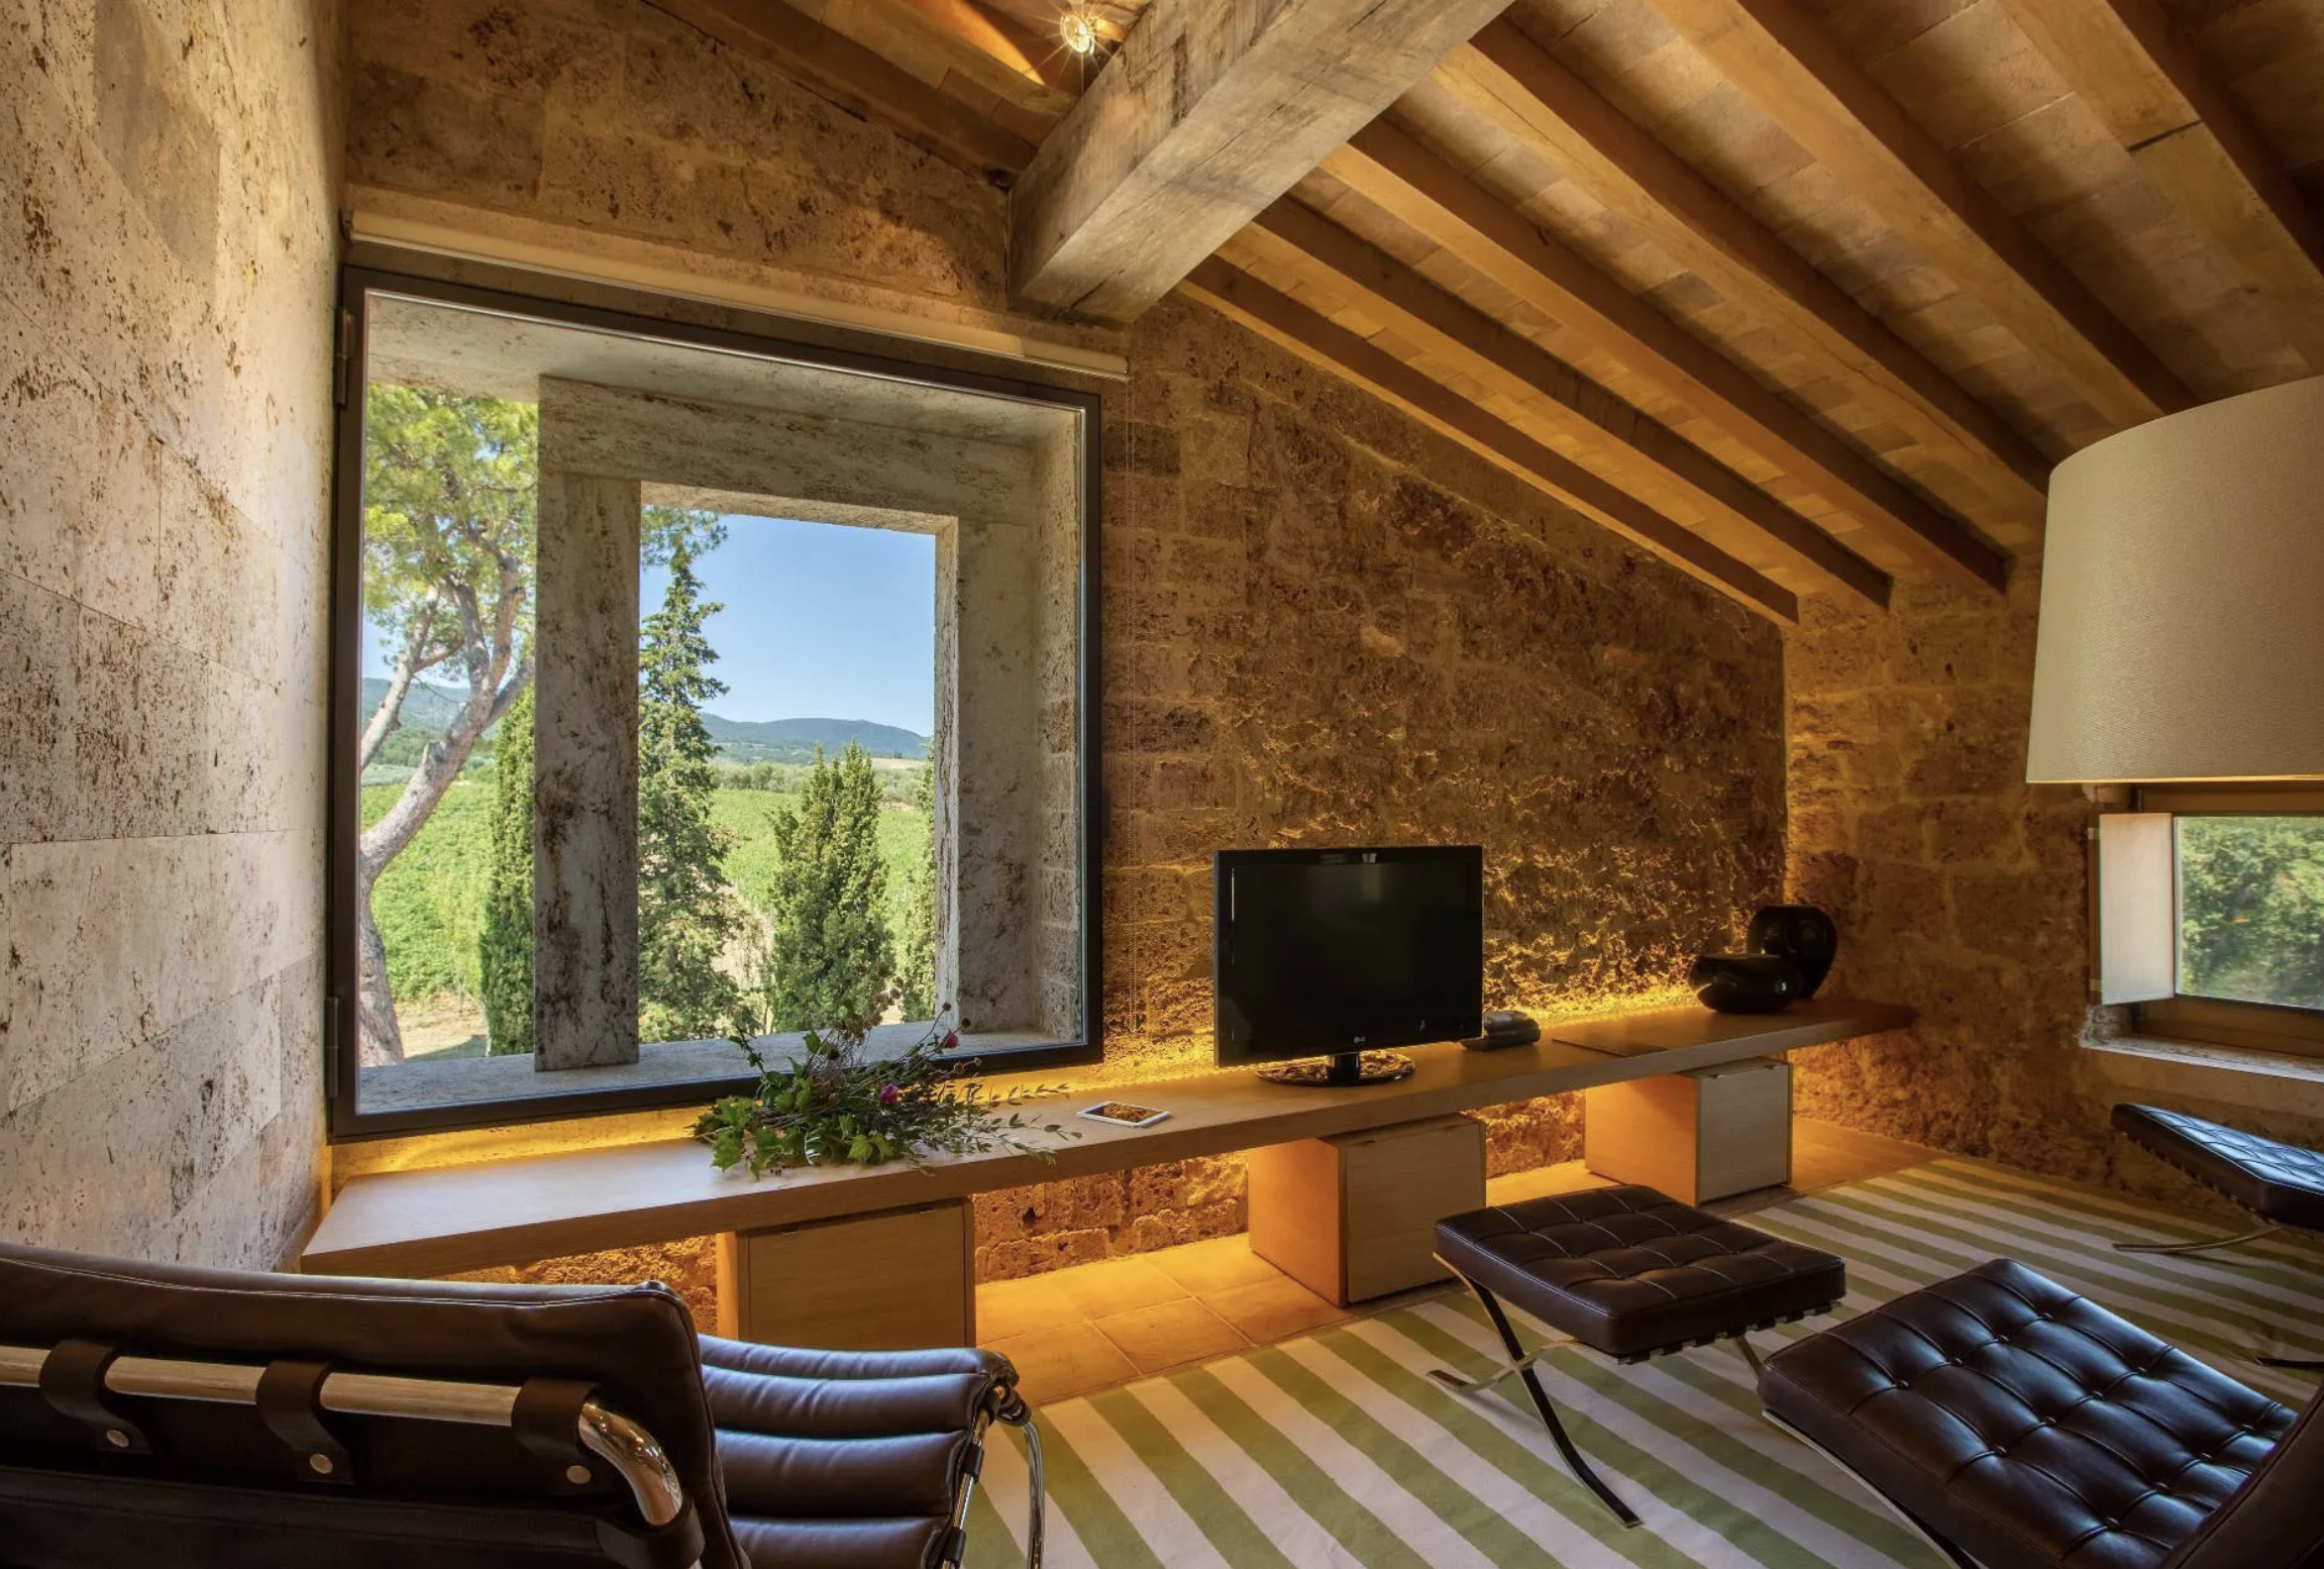 Francis York Villa Travertino: Luxury Villa and Wine Estate in the Heart of Tuscany 38.png